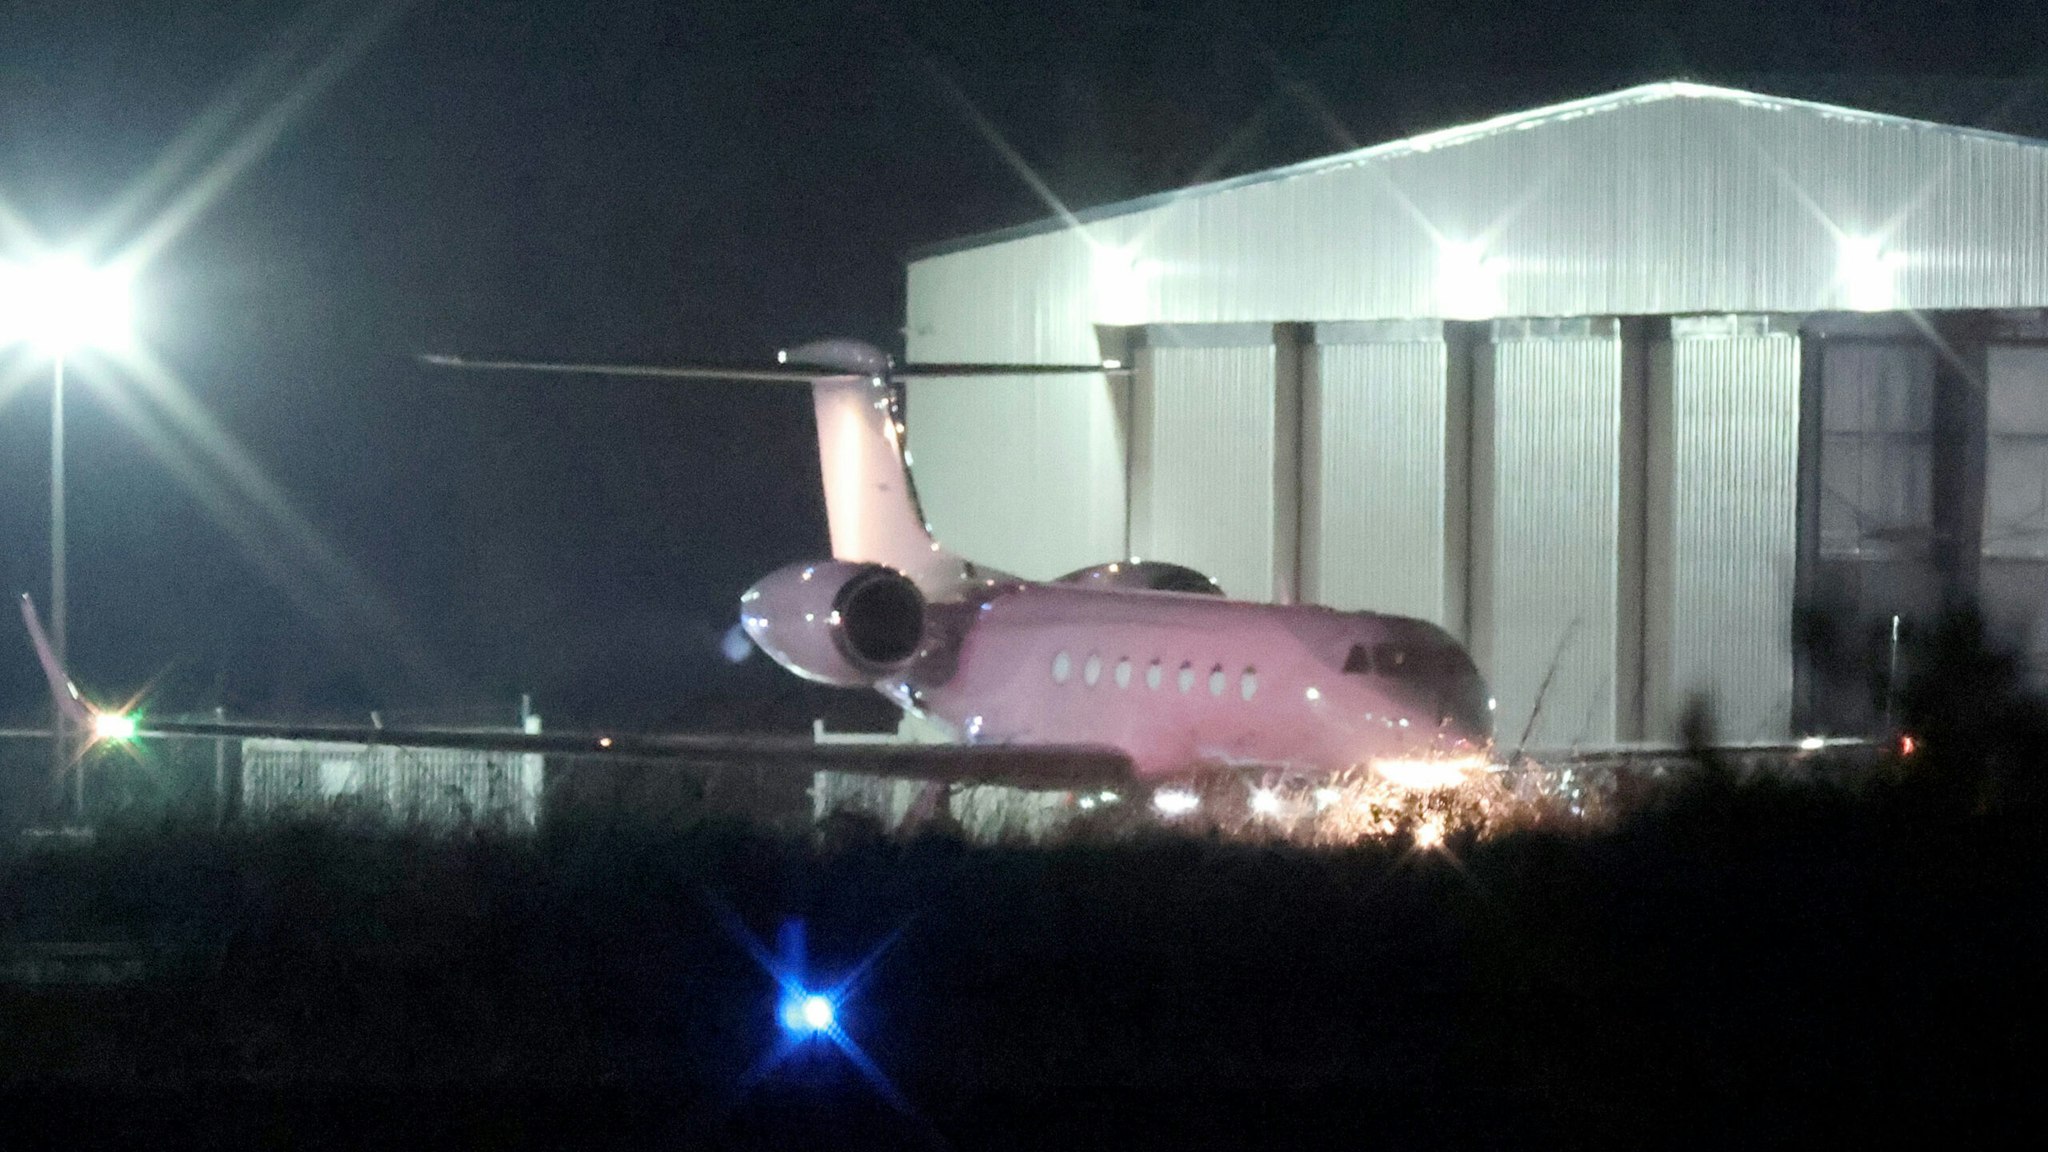 NASSAU, BAHAMAS - DECEMBER 21: A plane taxis toward the runway at Odyssey Aviation with FTX co-founder Sam Bankman-Fried on board as he is extradited to the United States on December 21, 2022 in Nassau, Bahamas. The former crypto billionaire is being extradited to the US from the Bahamas to face charges over FTX’s multi-billion-dollar collapse.